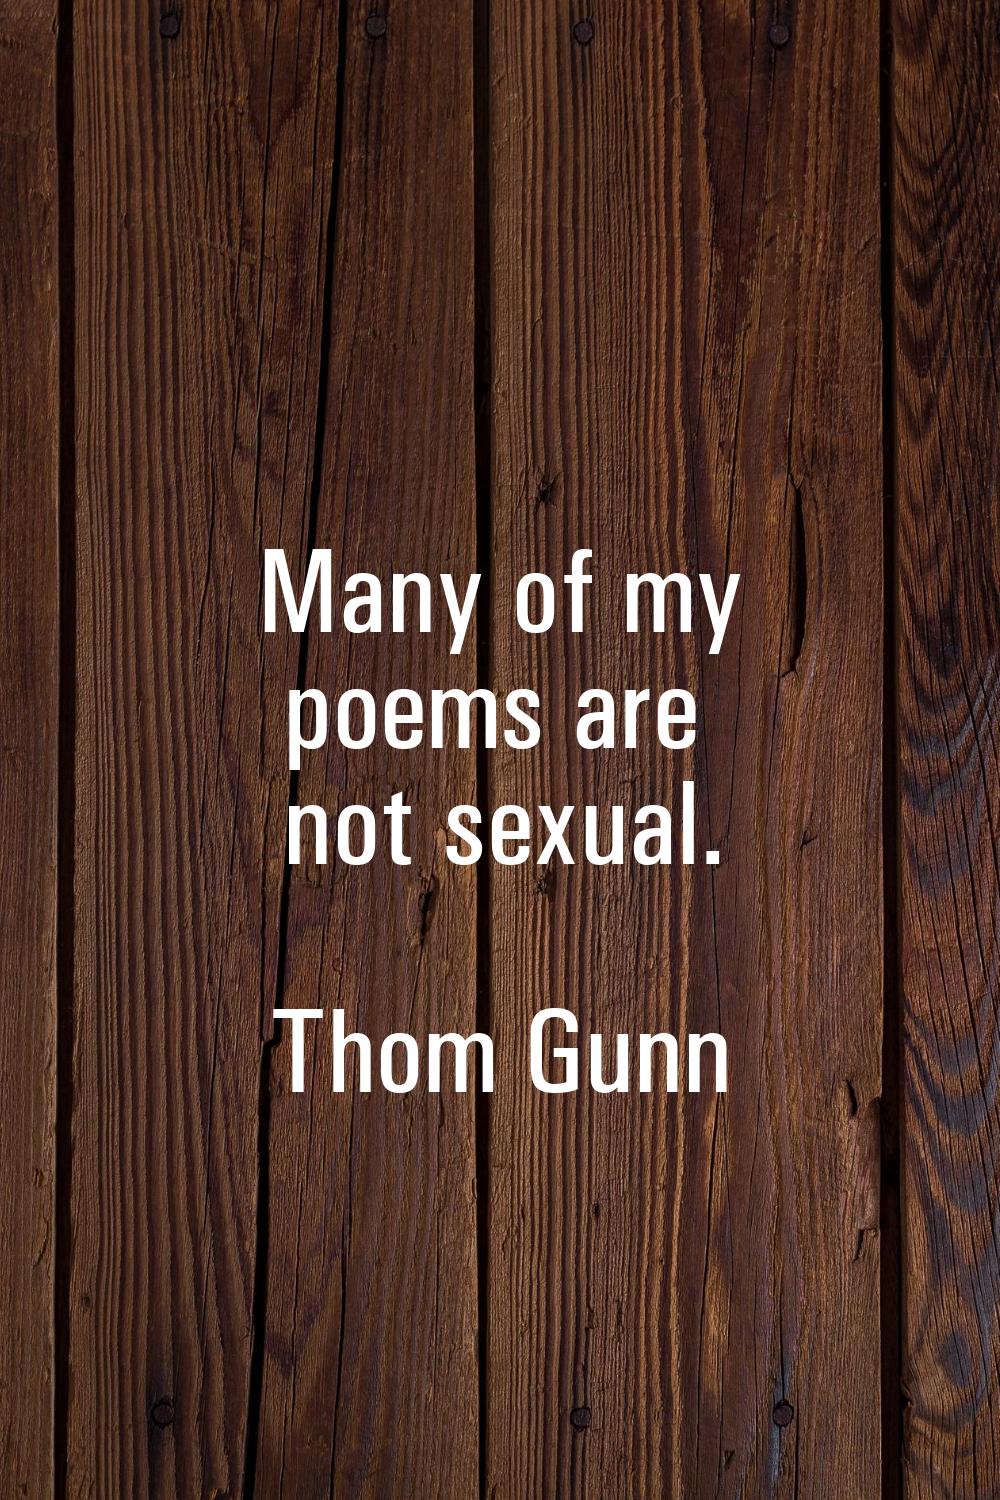 Many of my poems are not sexual.